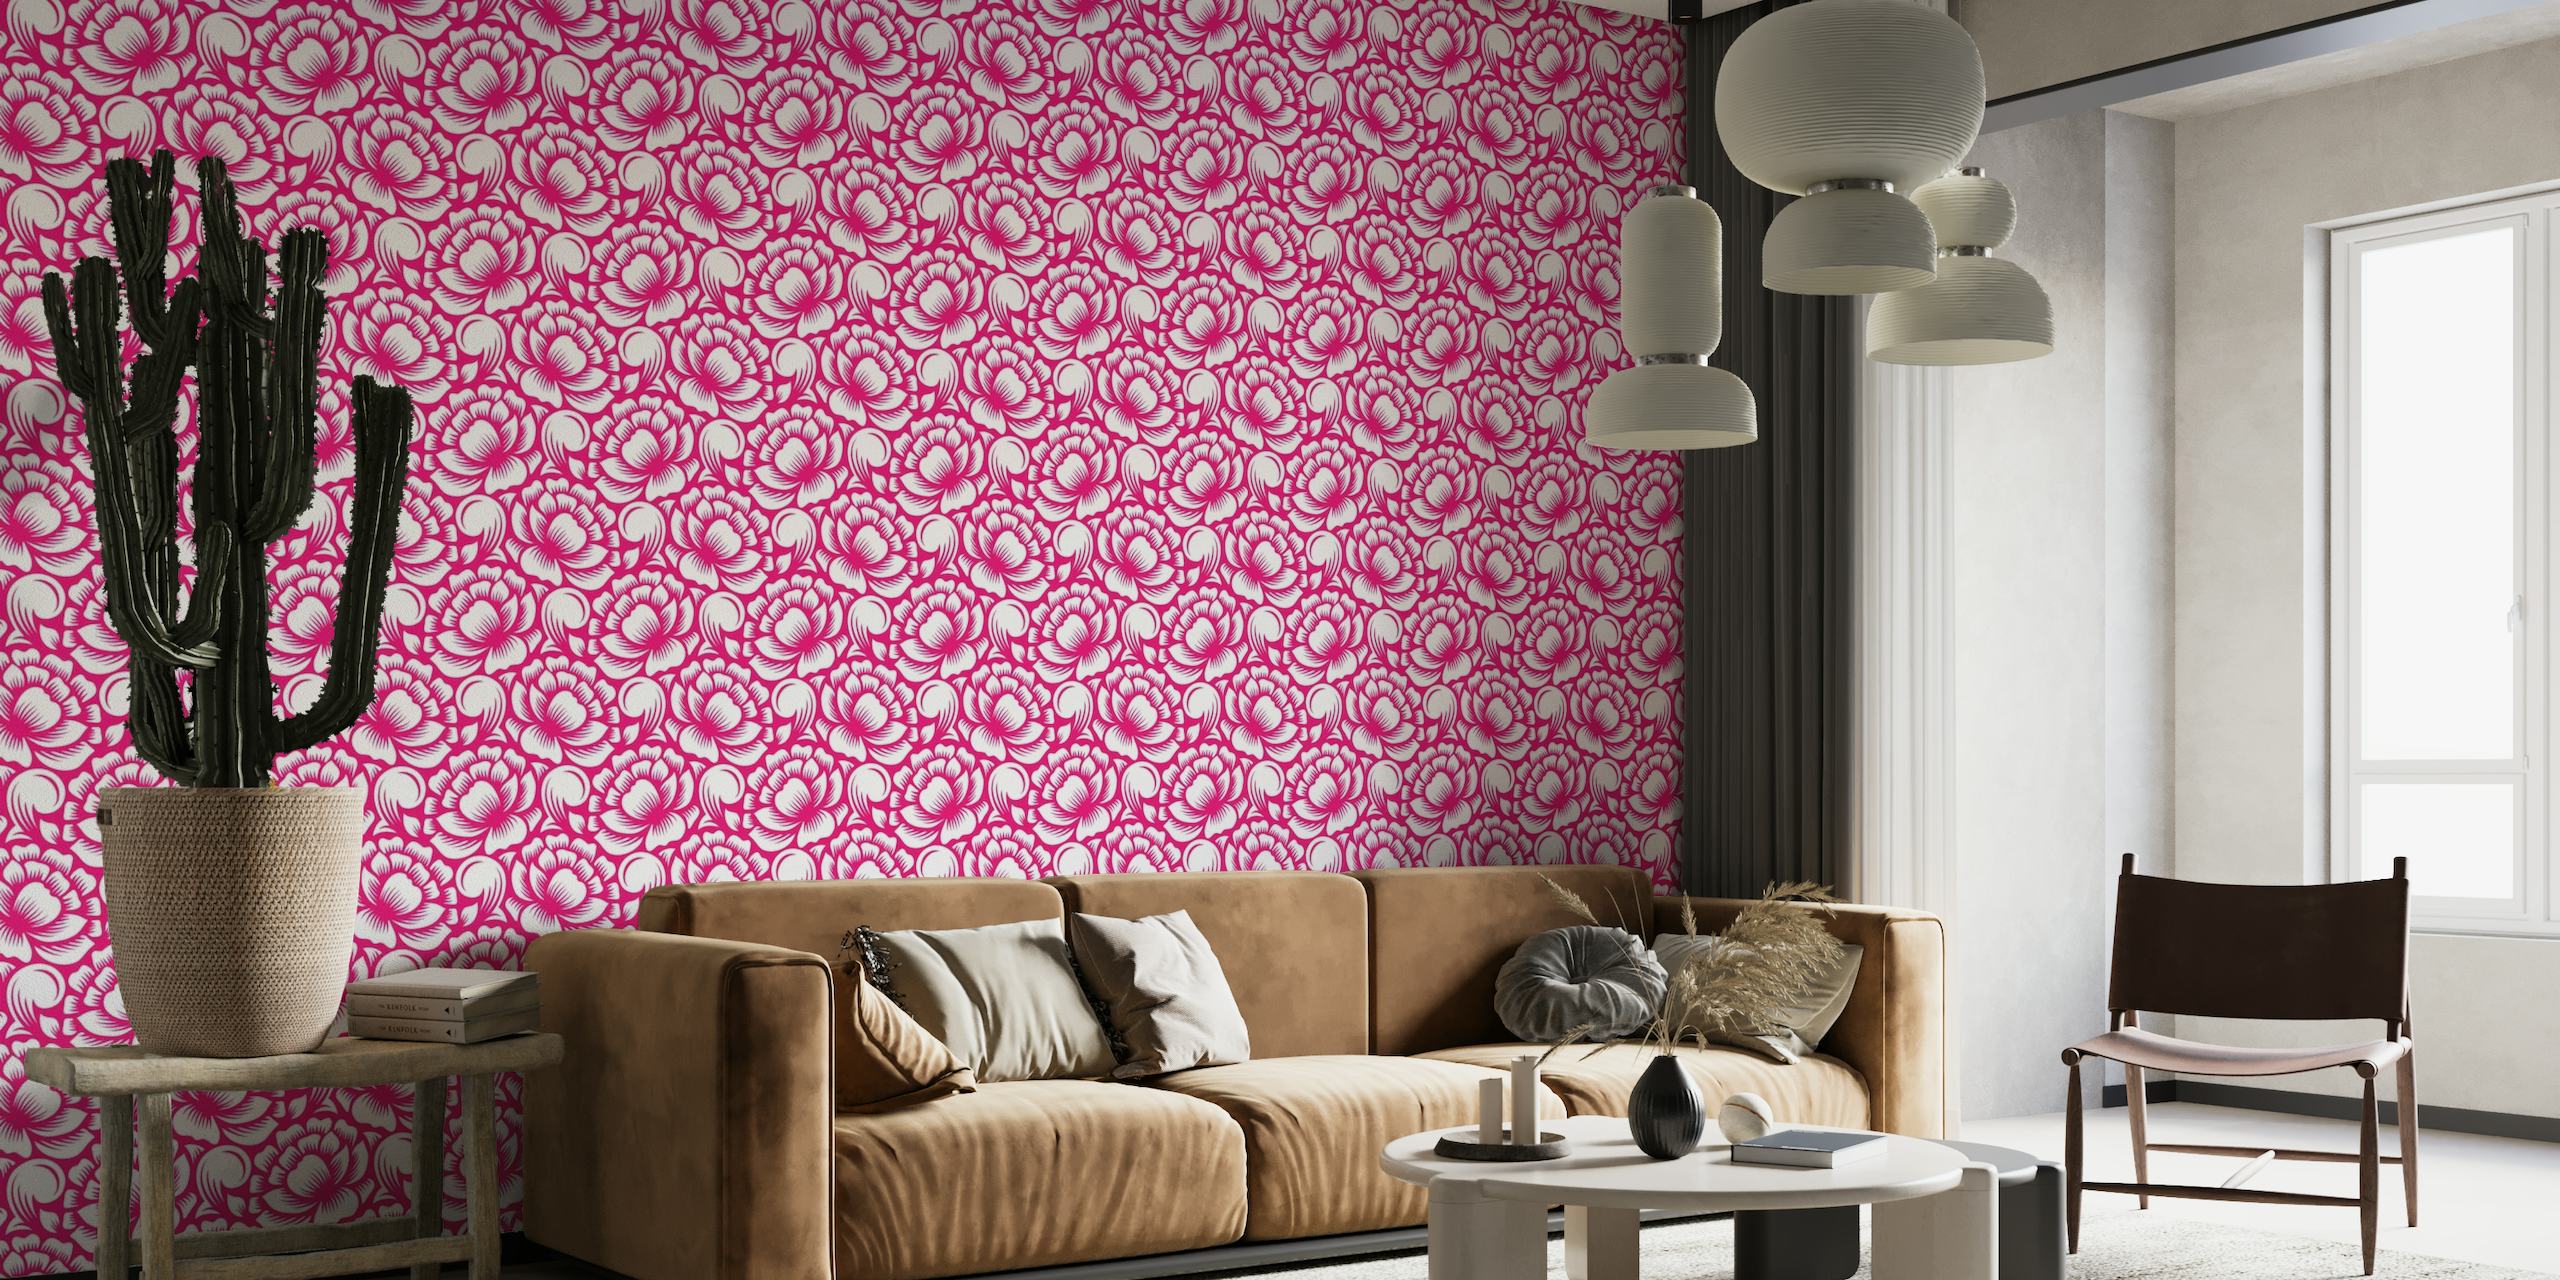 Viva magenta wall mural with flower silhouettes for stylish interior decor